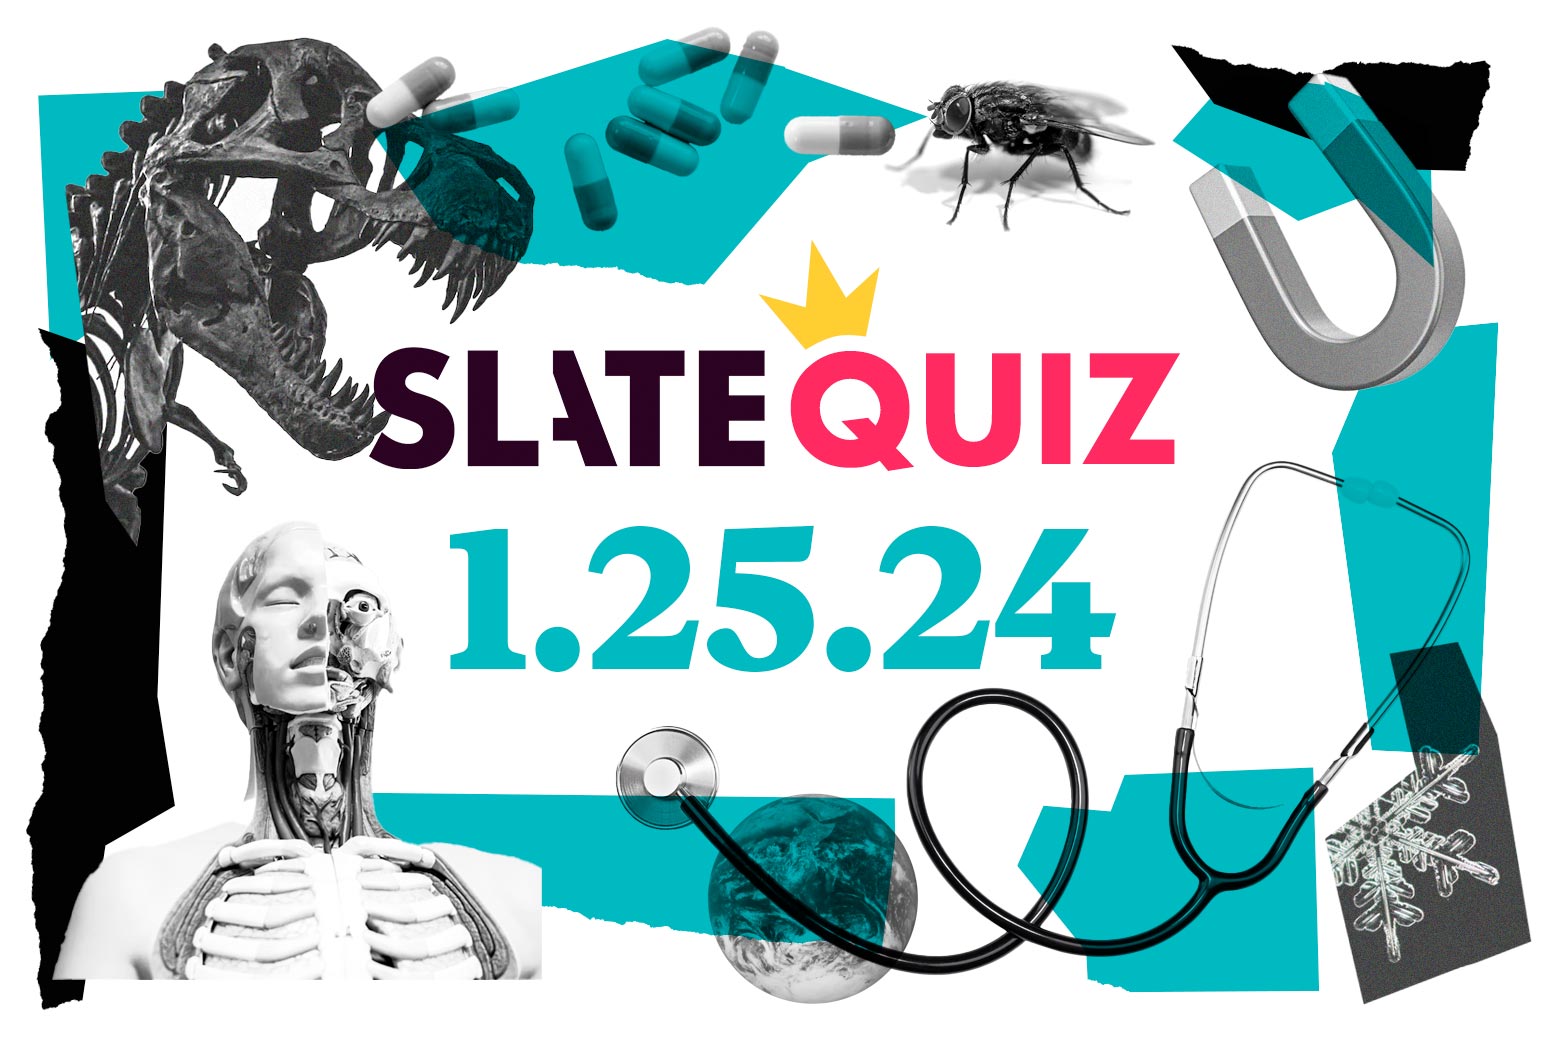 Think You’re Pretty Smart? Prove It With Our Daily Quiz. Ray Hamel